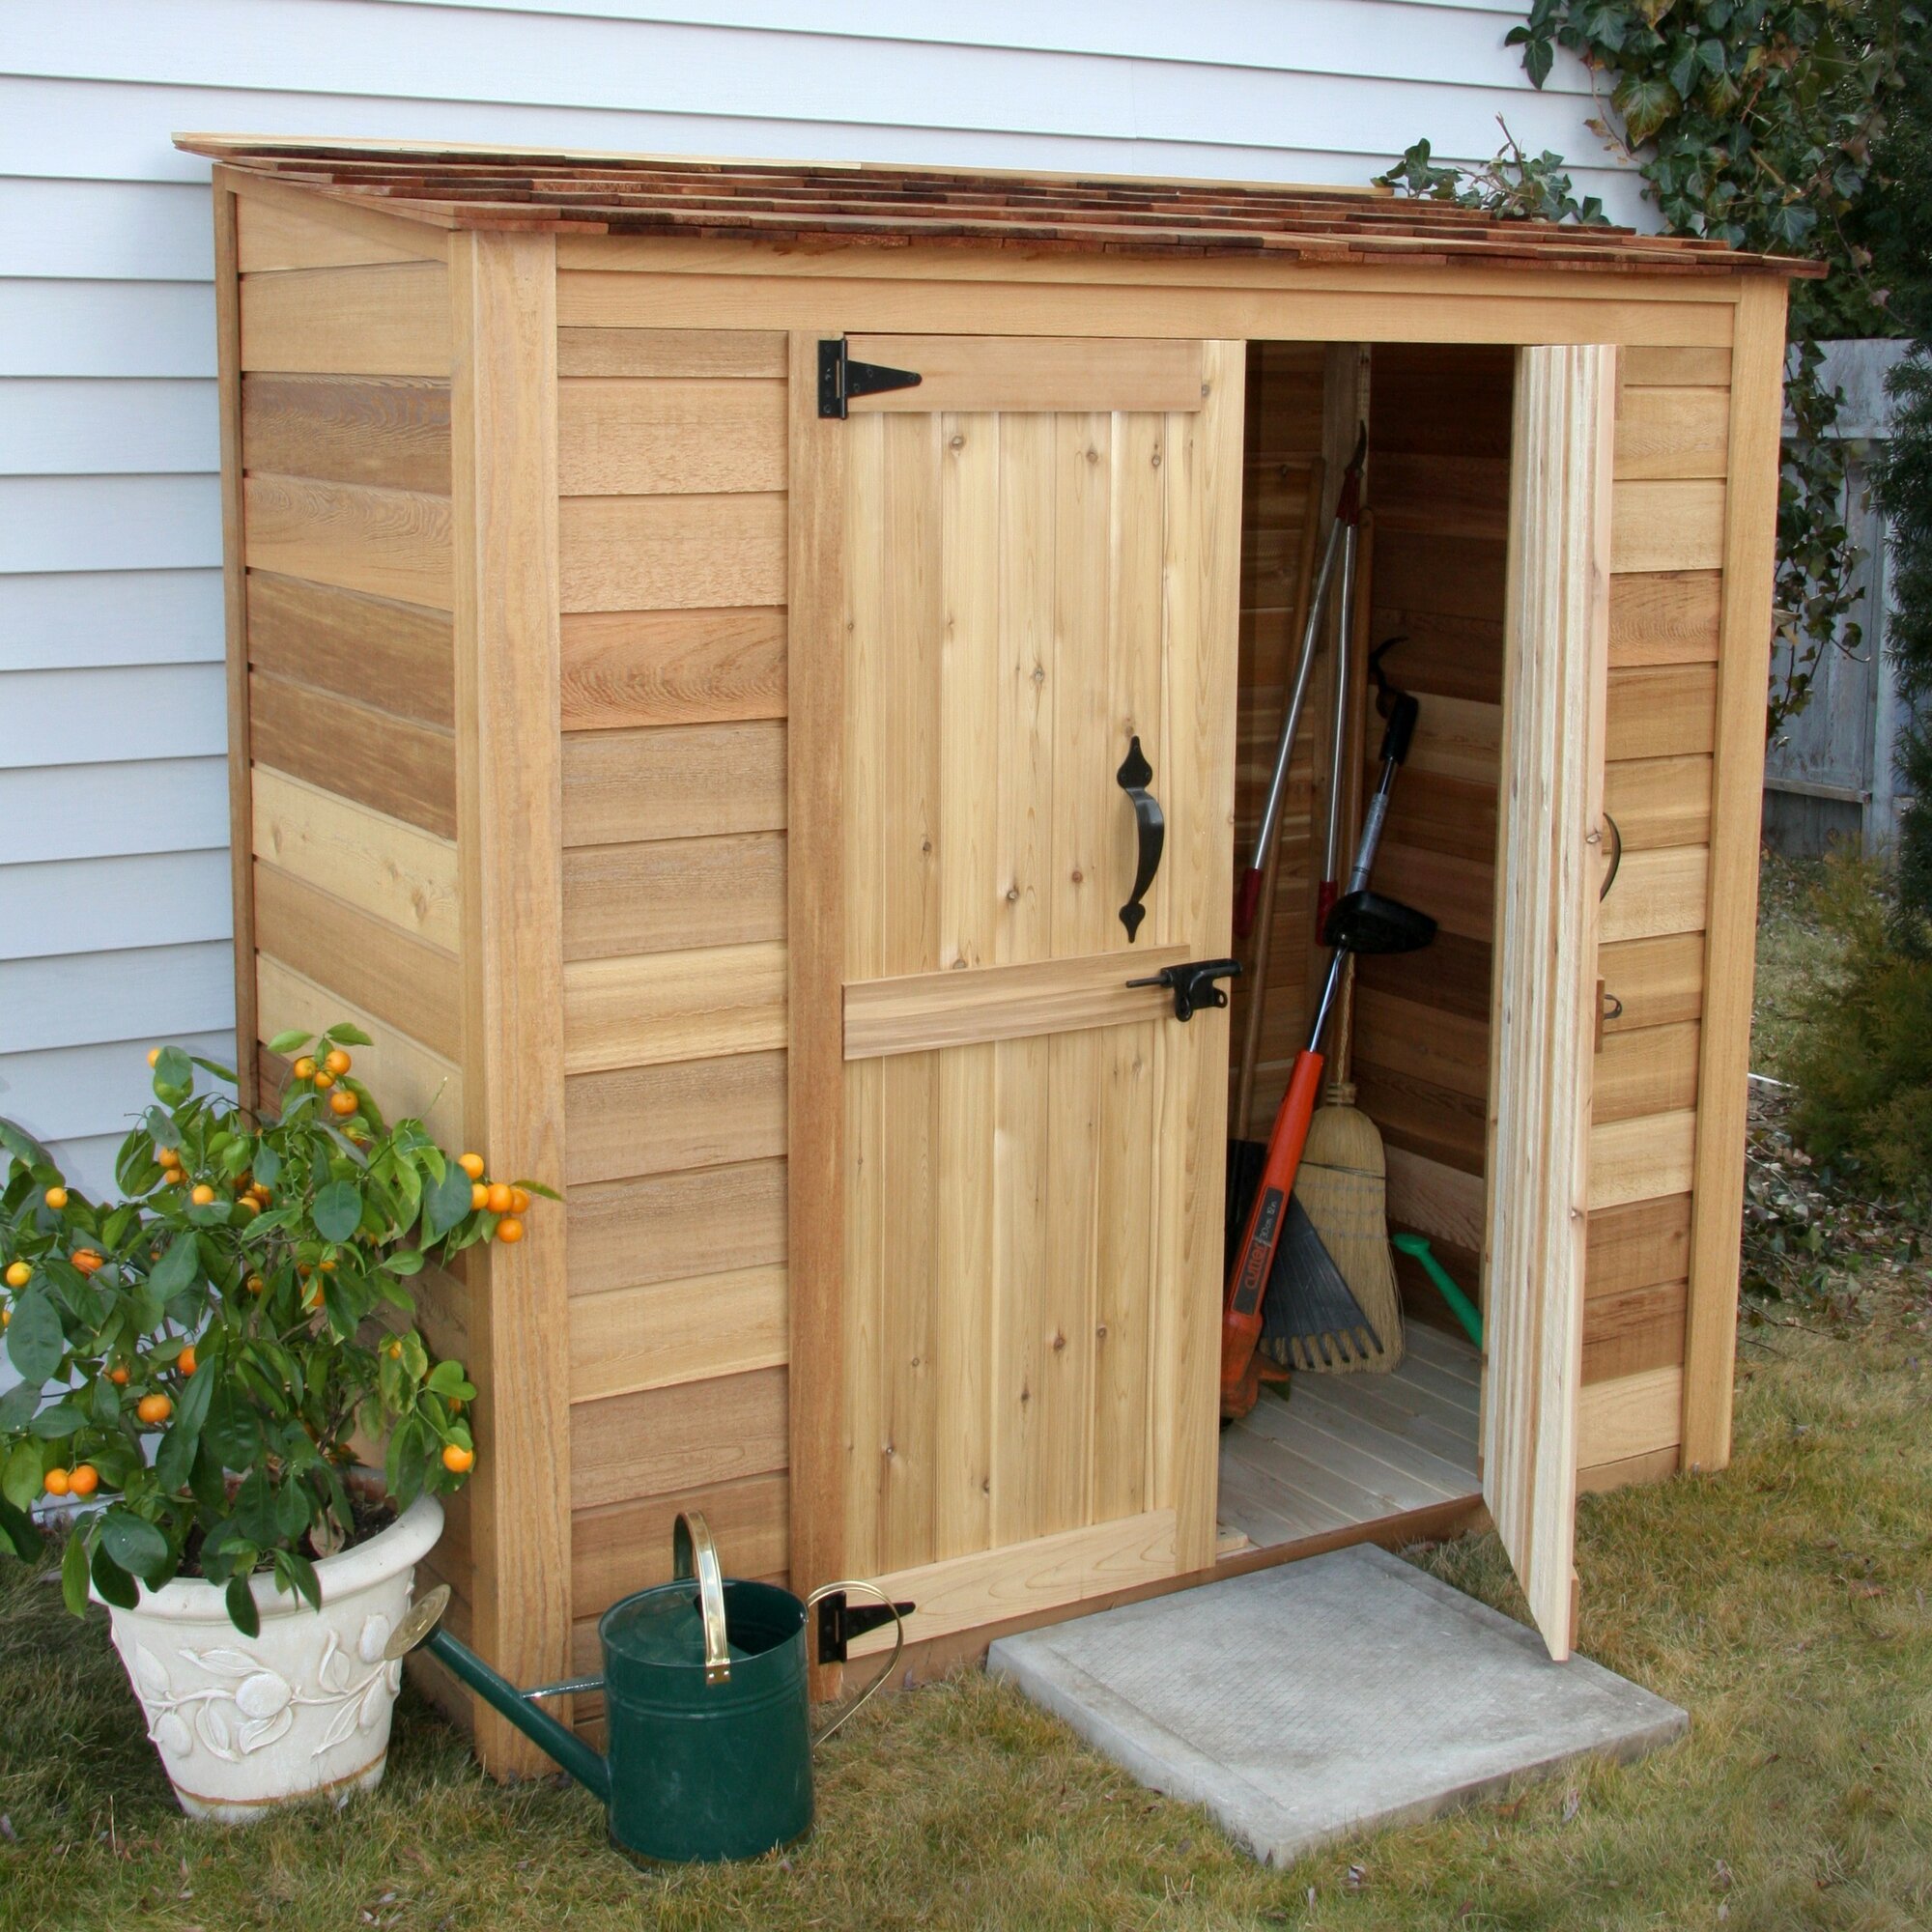 Lean to garden tool shed